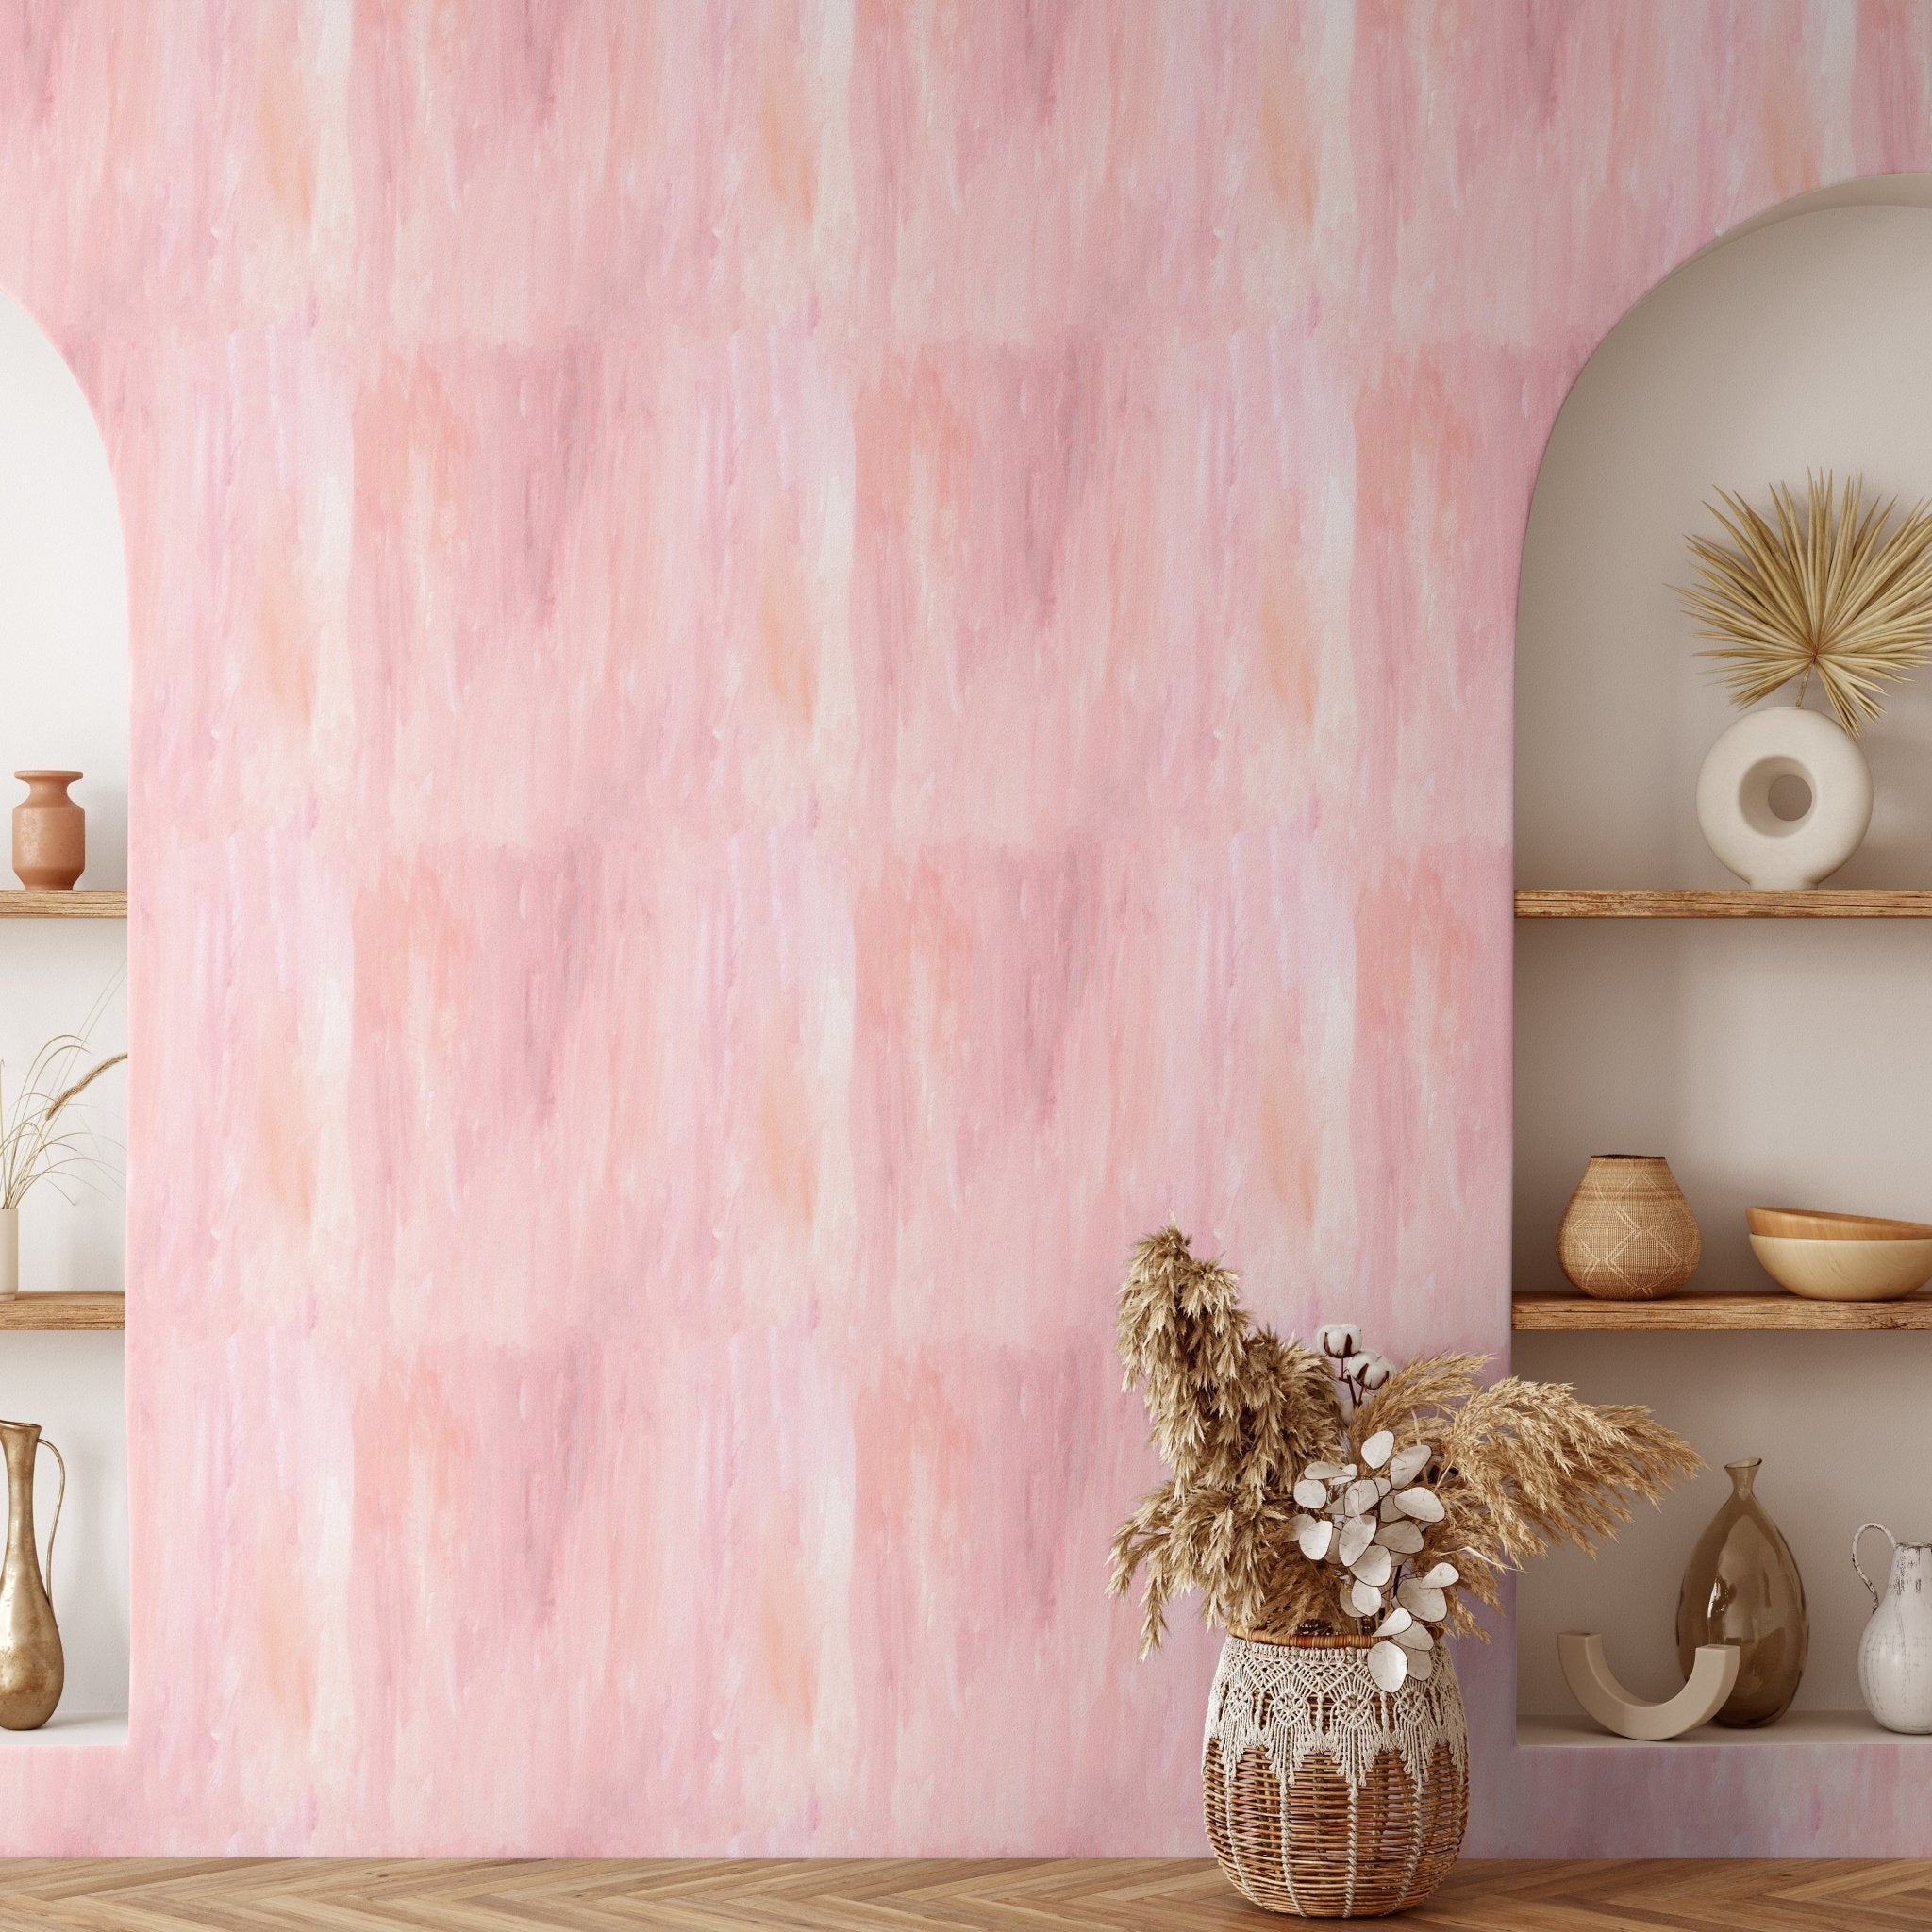 Textured Wallpaper, Peel and Stick, texture wall paper, removable wallpapers